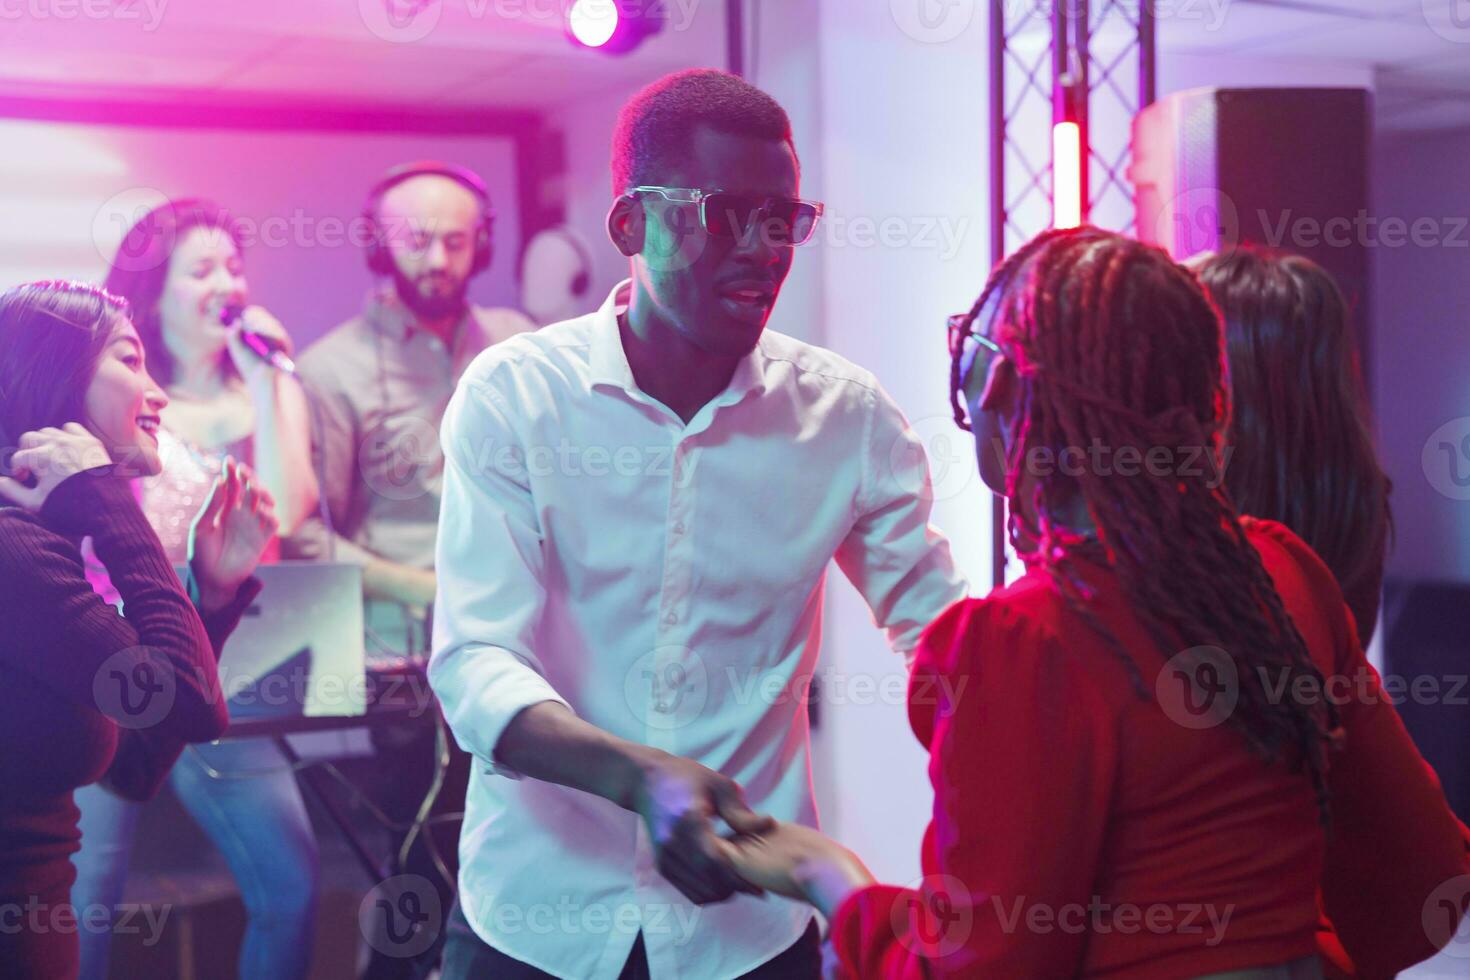 Couple partying on dancefloor in nightclub at discotheque and enjoying nightlife entertainment. African american man and woman dancing while attending electronic music performance photo